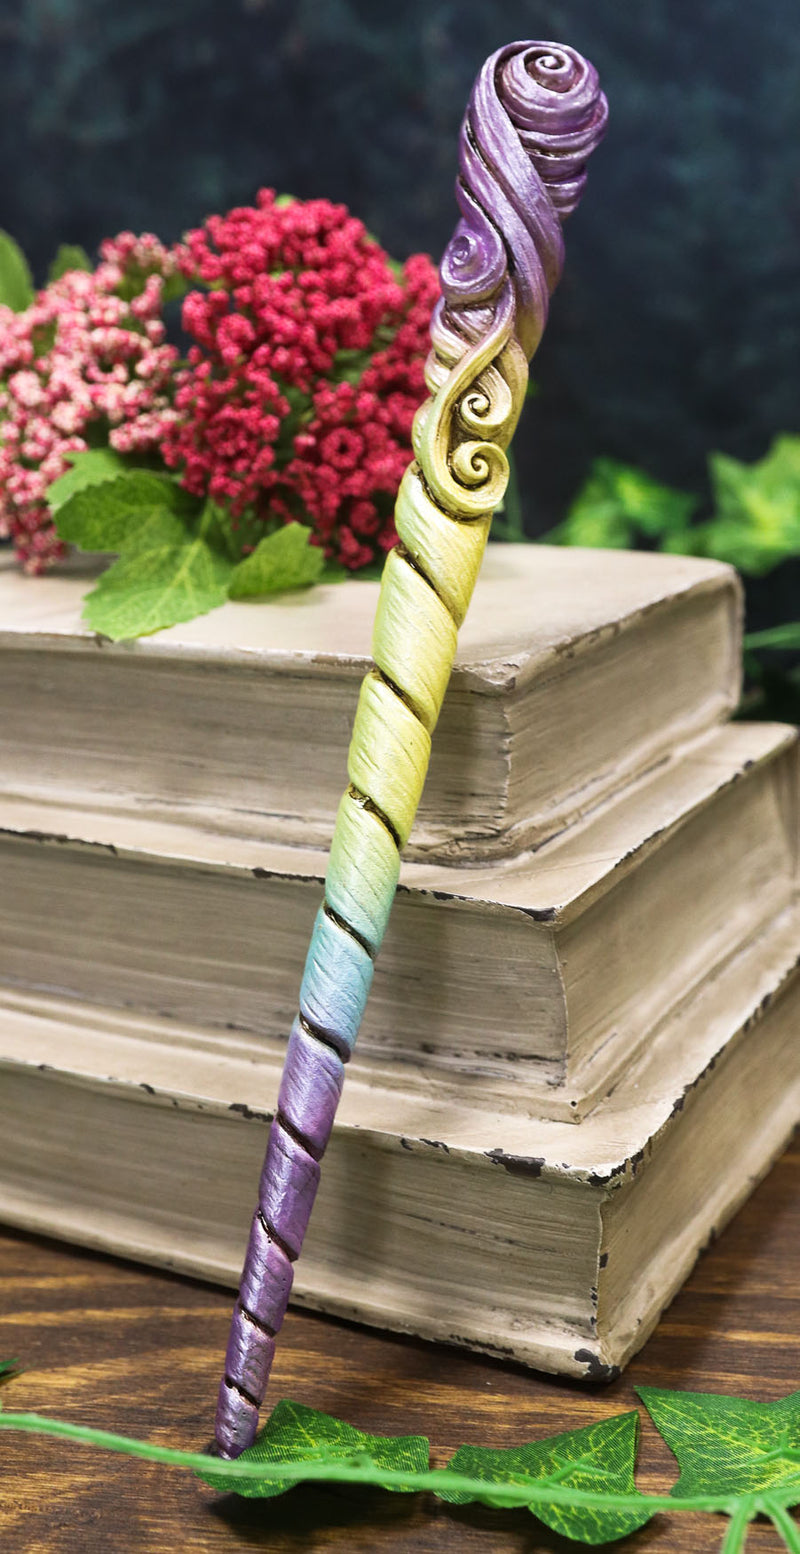 Witches Wizards Fantasy Cosplay Rainbow Unicorn Horn Magic Wand Prop Accessory